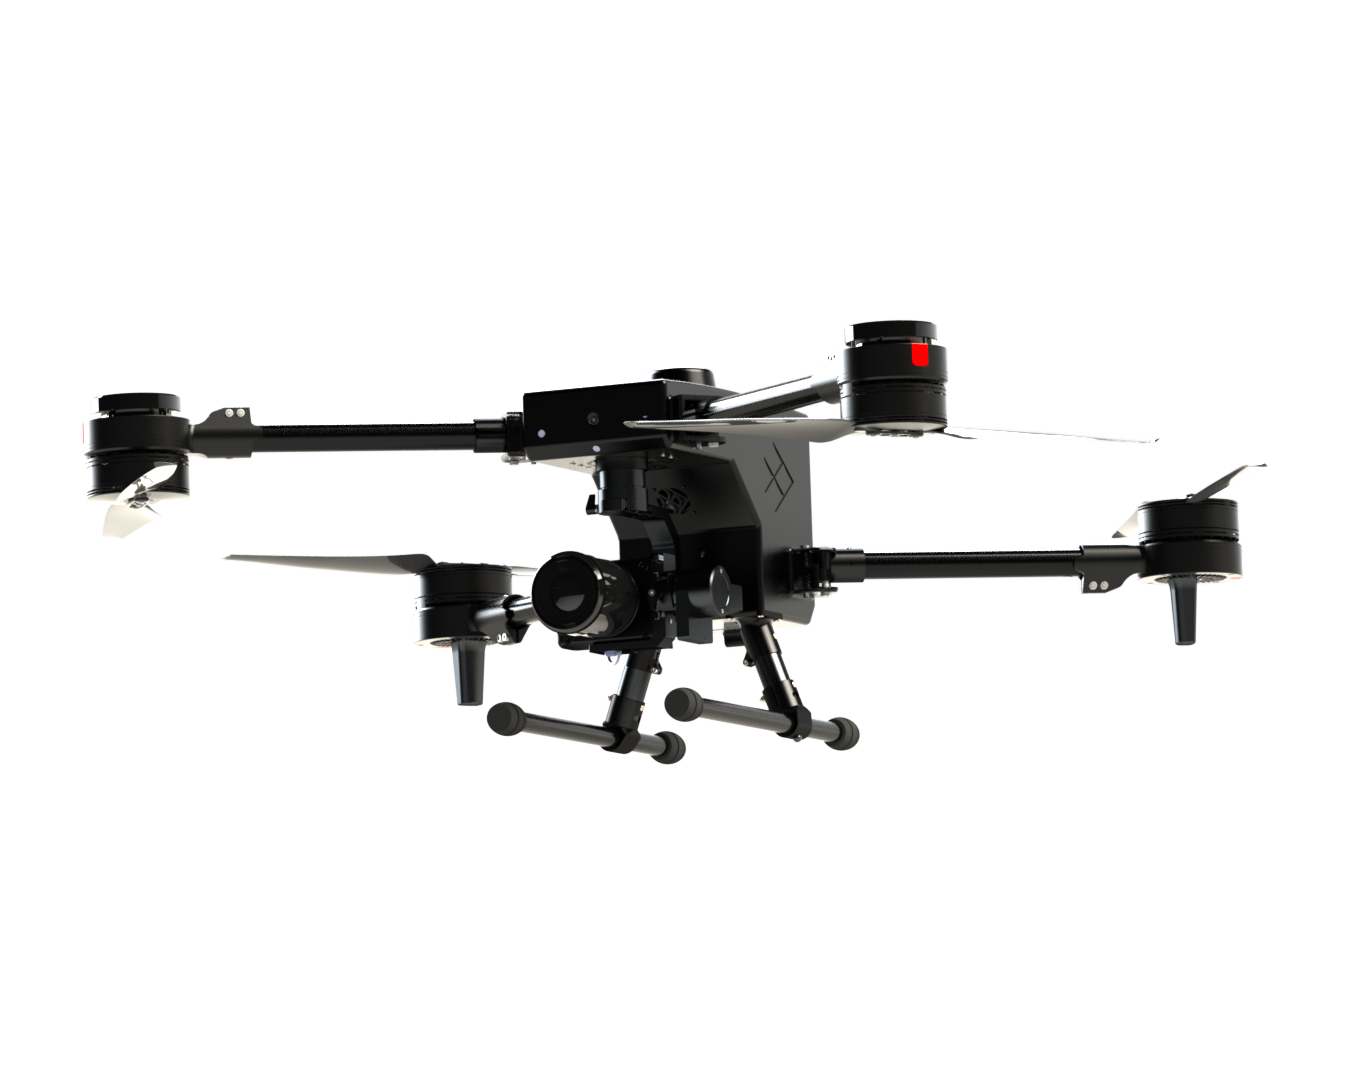 New American-Made Lightweight Professional Drone for Inspections and ISR